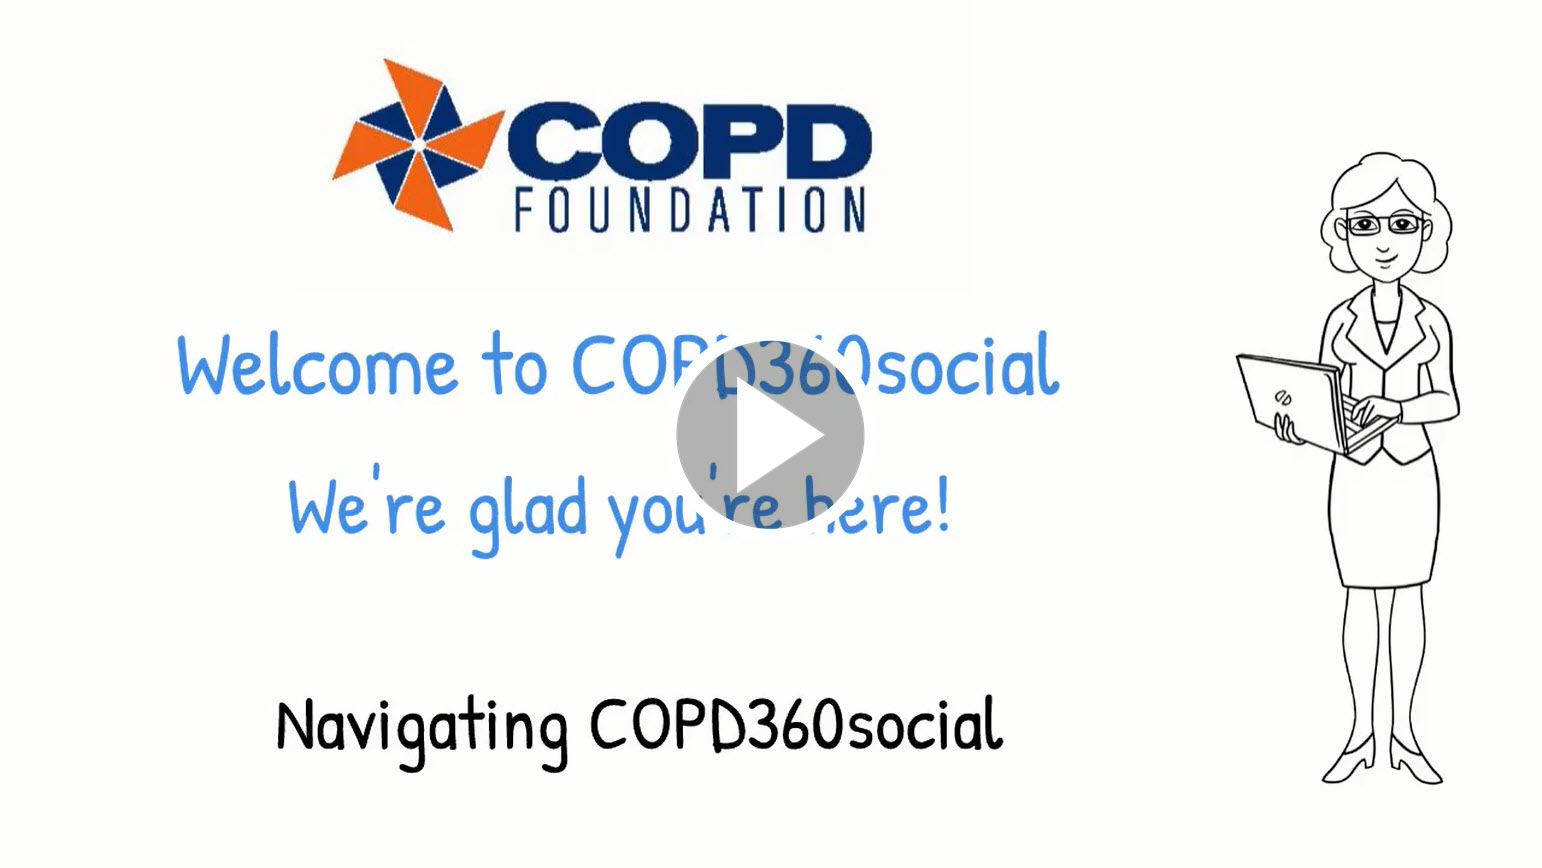 Overview of navigating COPD360social. Click to watch the video.